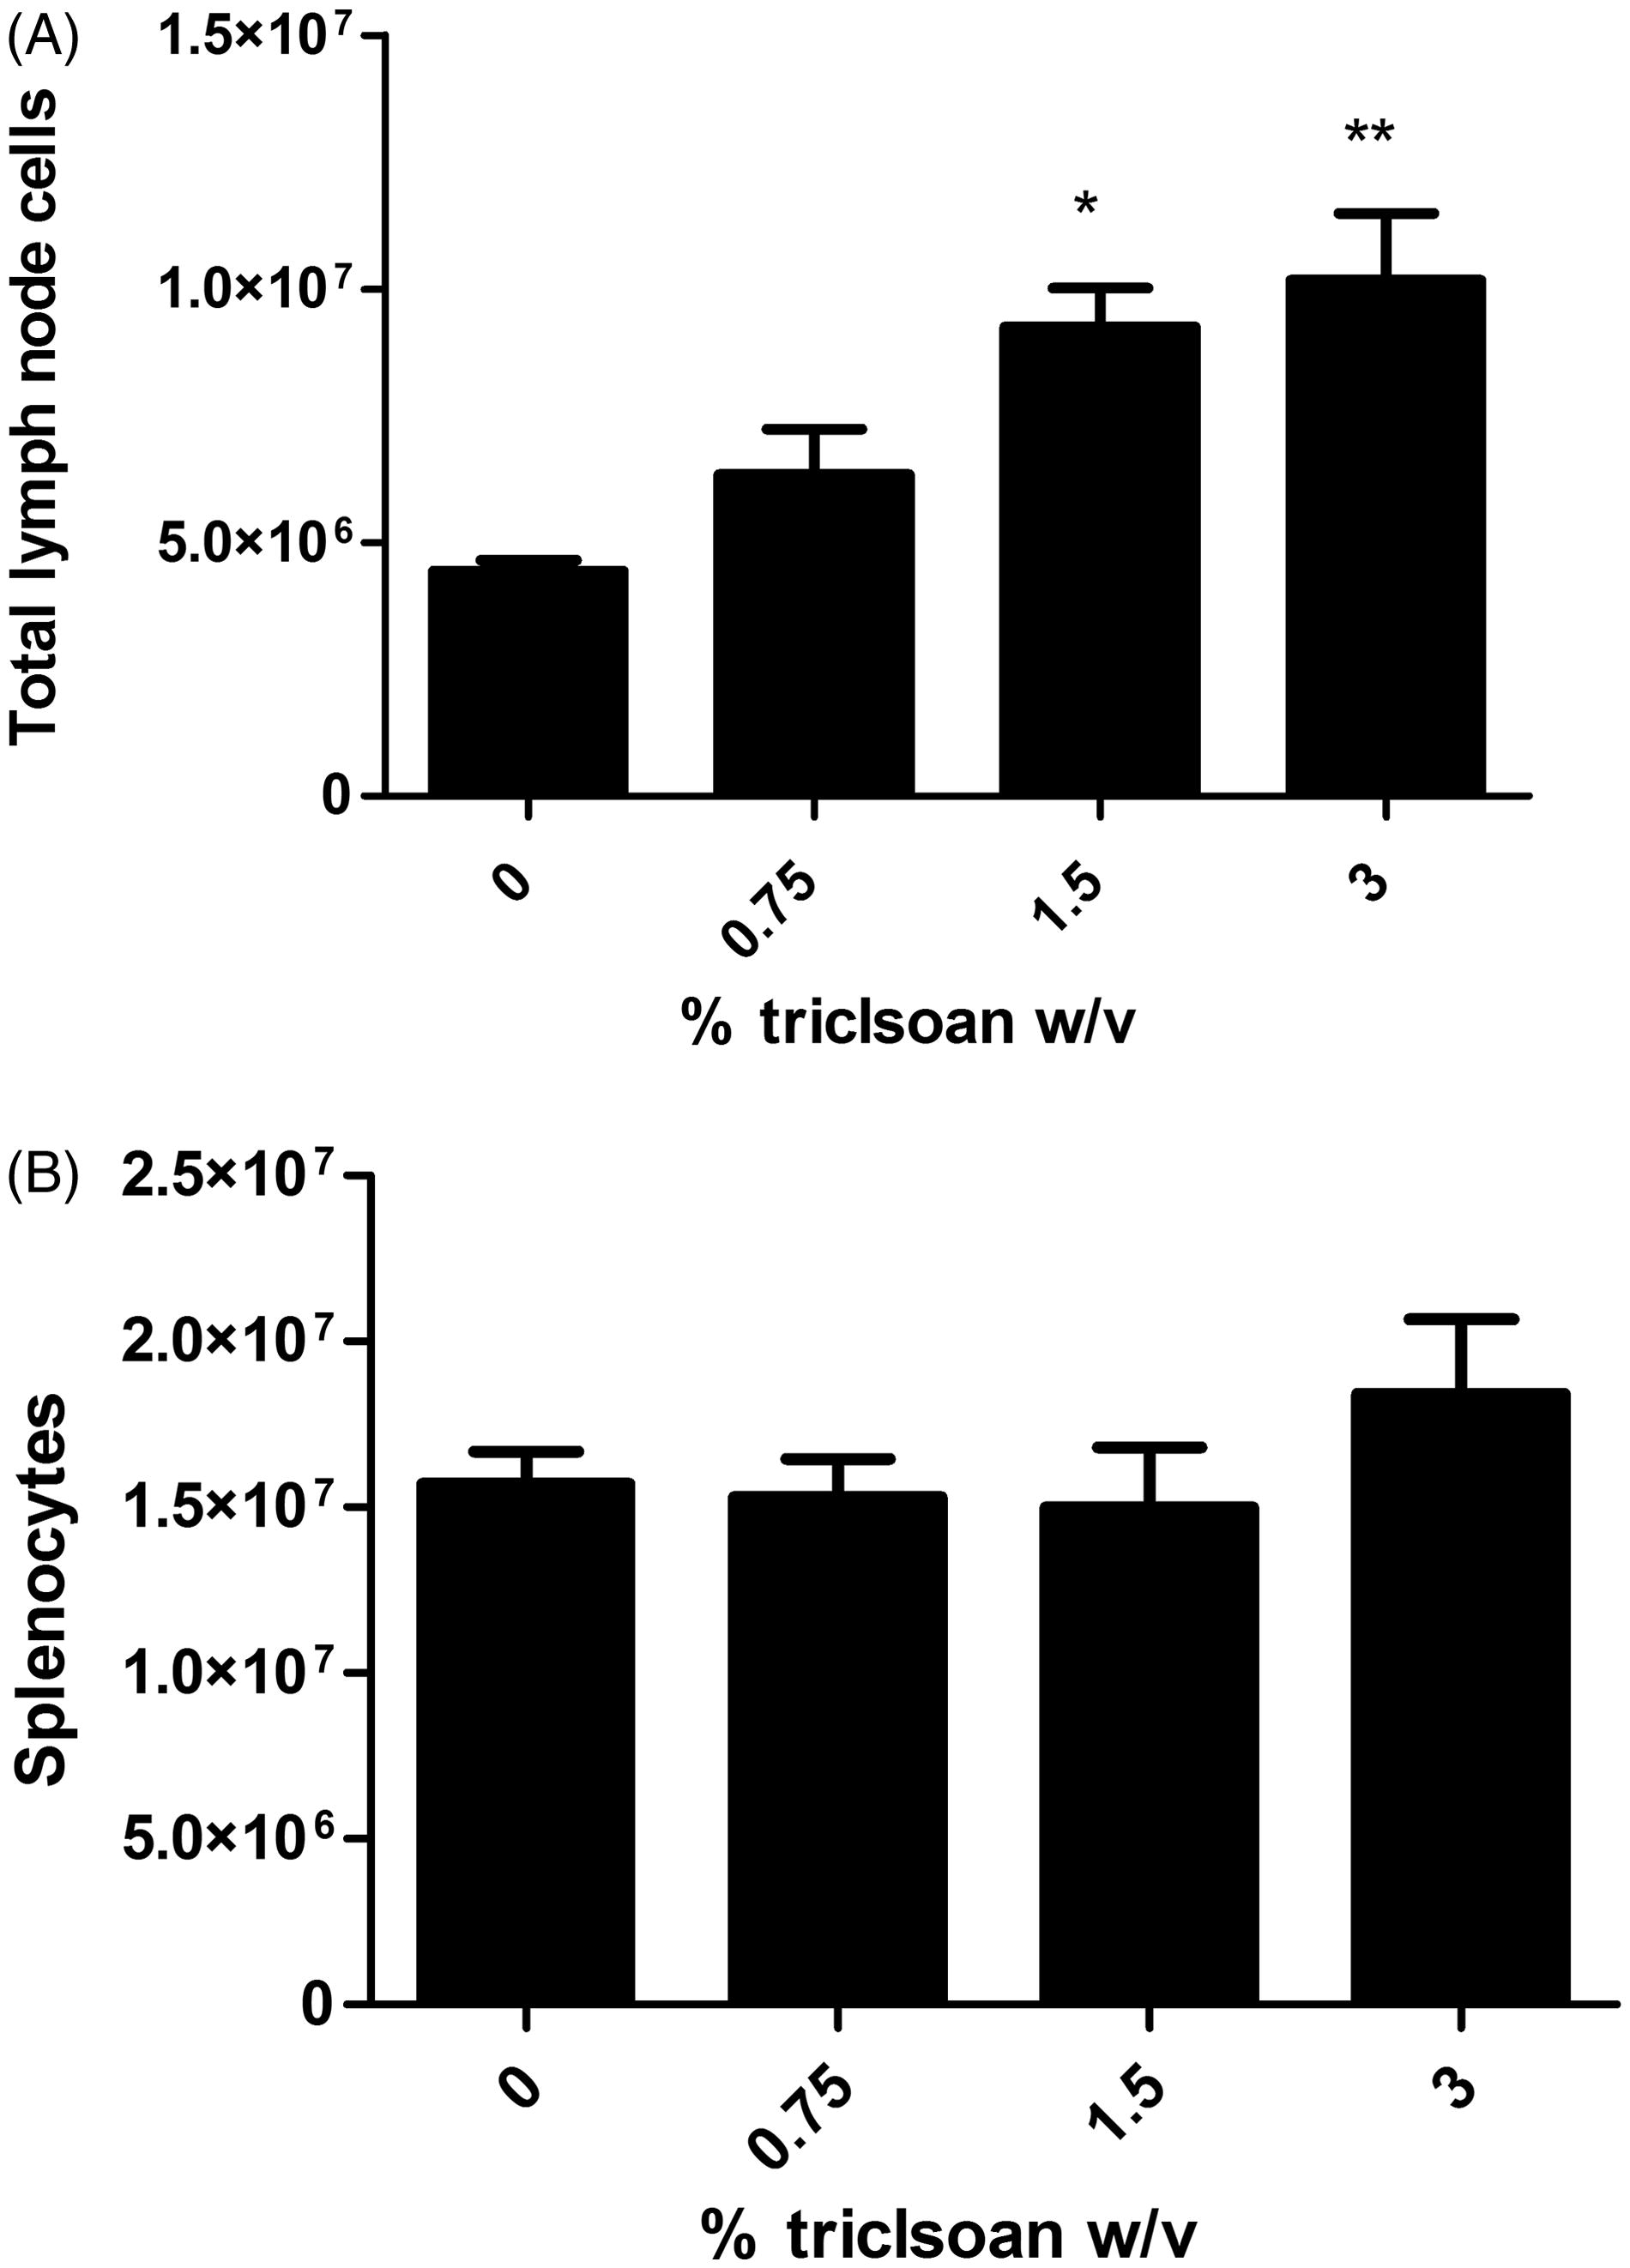 Figure 3. Effects of dermal exposure to triclosan on lymph node and spleen cellularity. Effects of dermal exposure to triclosan for 28 days on (A) lymph node and (B) spleen cellularity in female B6C3F1 mice. Values shown are means (±SE) for each group. Levels of statistical significance are denoted *p < 0.05 and **p < 0.01 as compared to acetone vehicle.